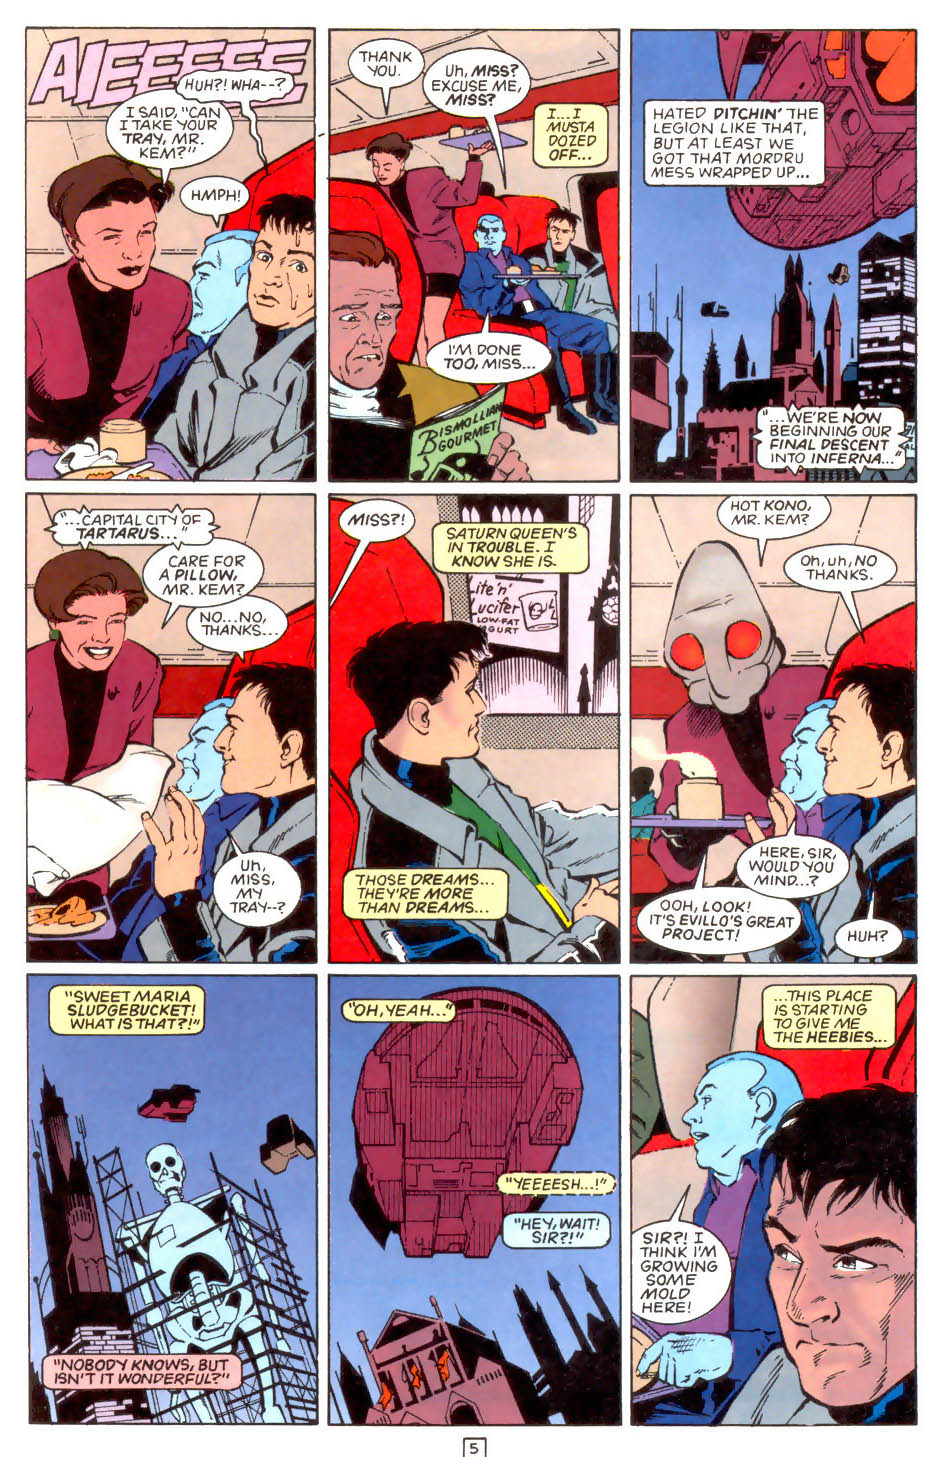 Legion of Super-Heroes (1989) 49 Page 5